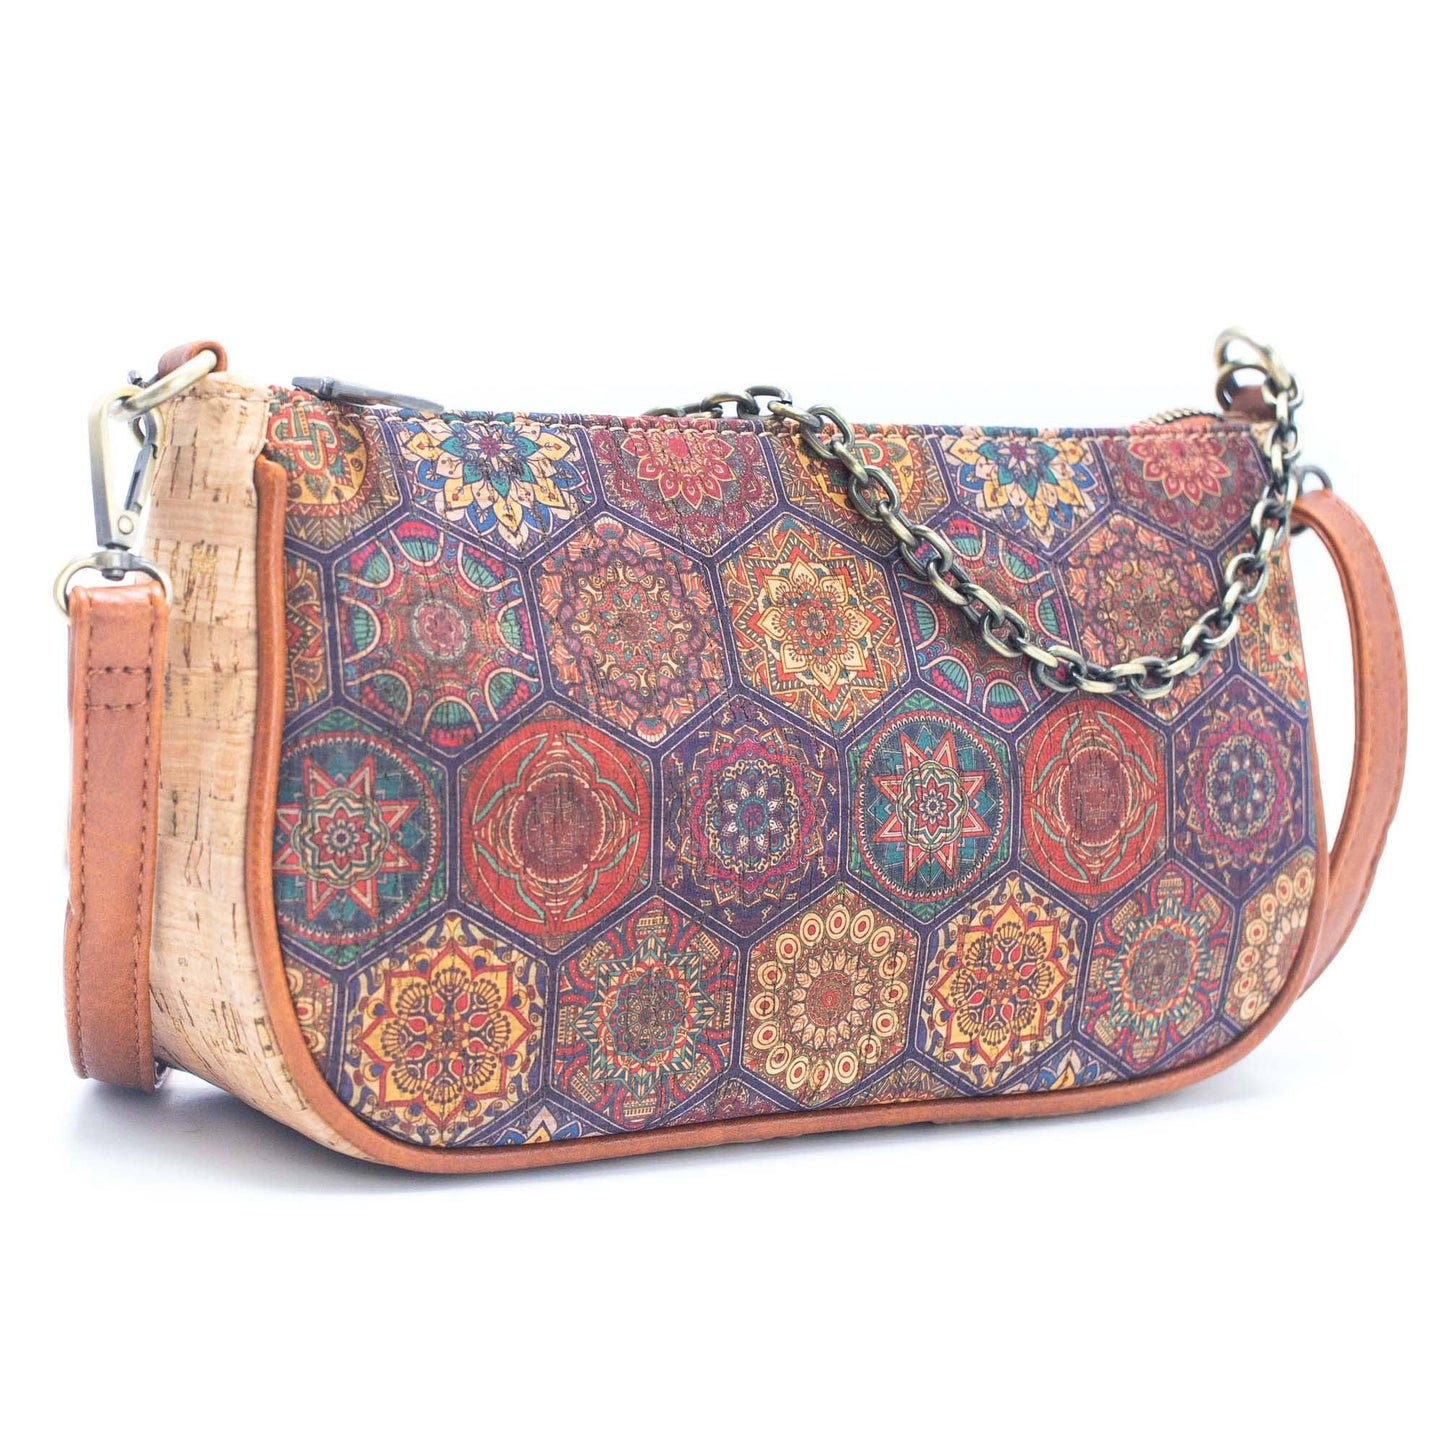 Natural Cork Crossbody Bag with Mosaic and Floral Prints and Adjustable Straps